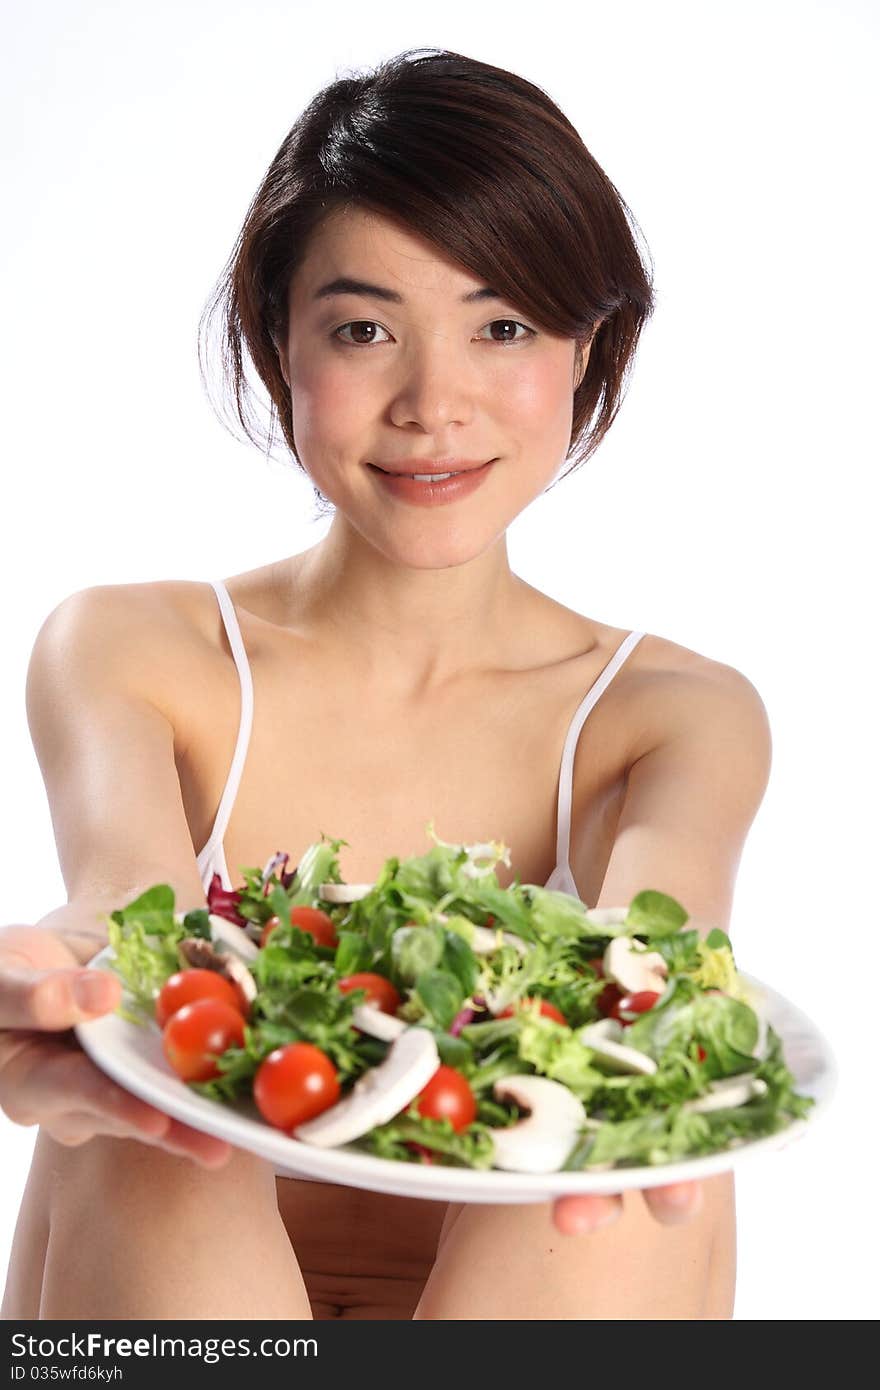 Beautiful, smiling young Japanese girl, wearing white sports bra, holds out a plate of green salad. Focus is sharp on model with salad out of focus in foreground. Beautiful, smiling young Japanese girl, wearing white sports bra, holds out a plate of green salad. Focus is sharp on model with salad out of focus in foreground.